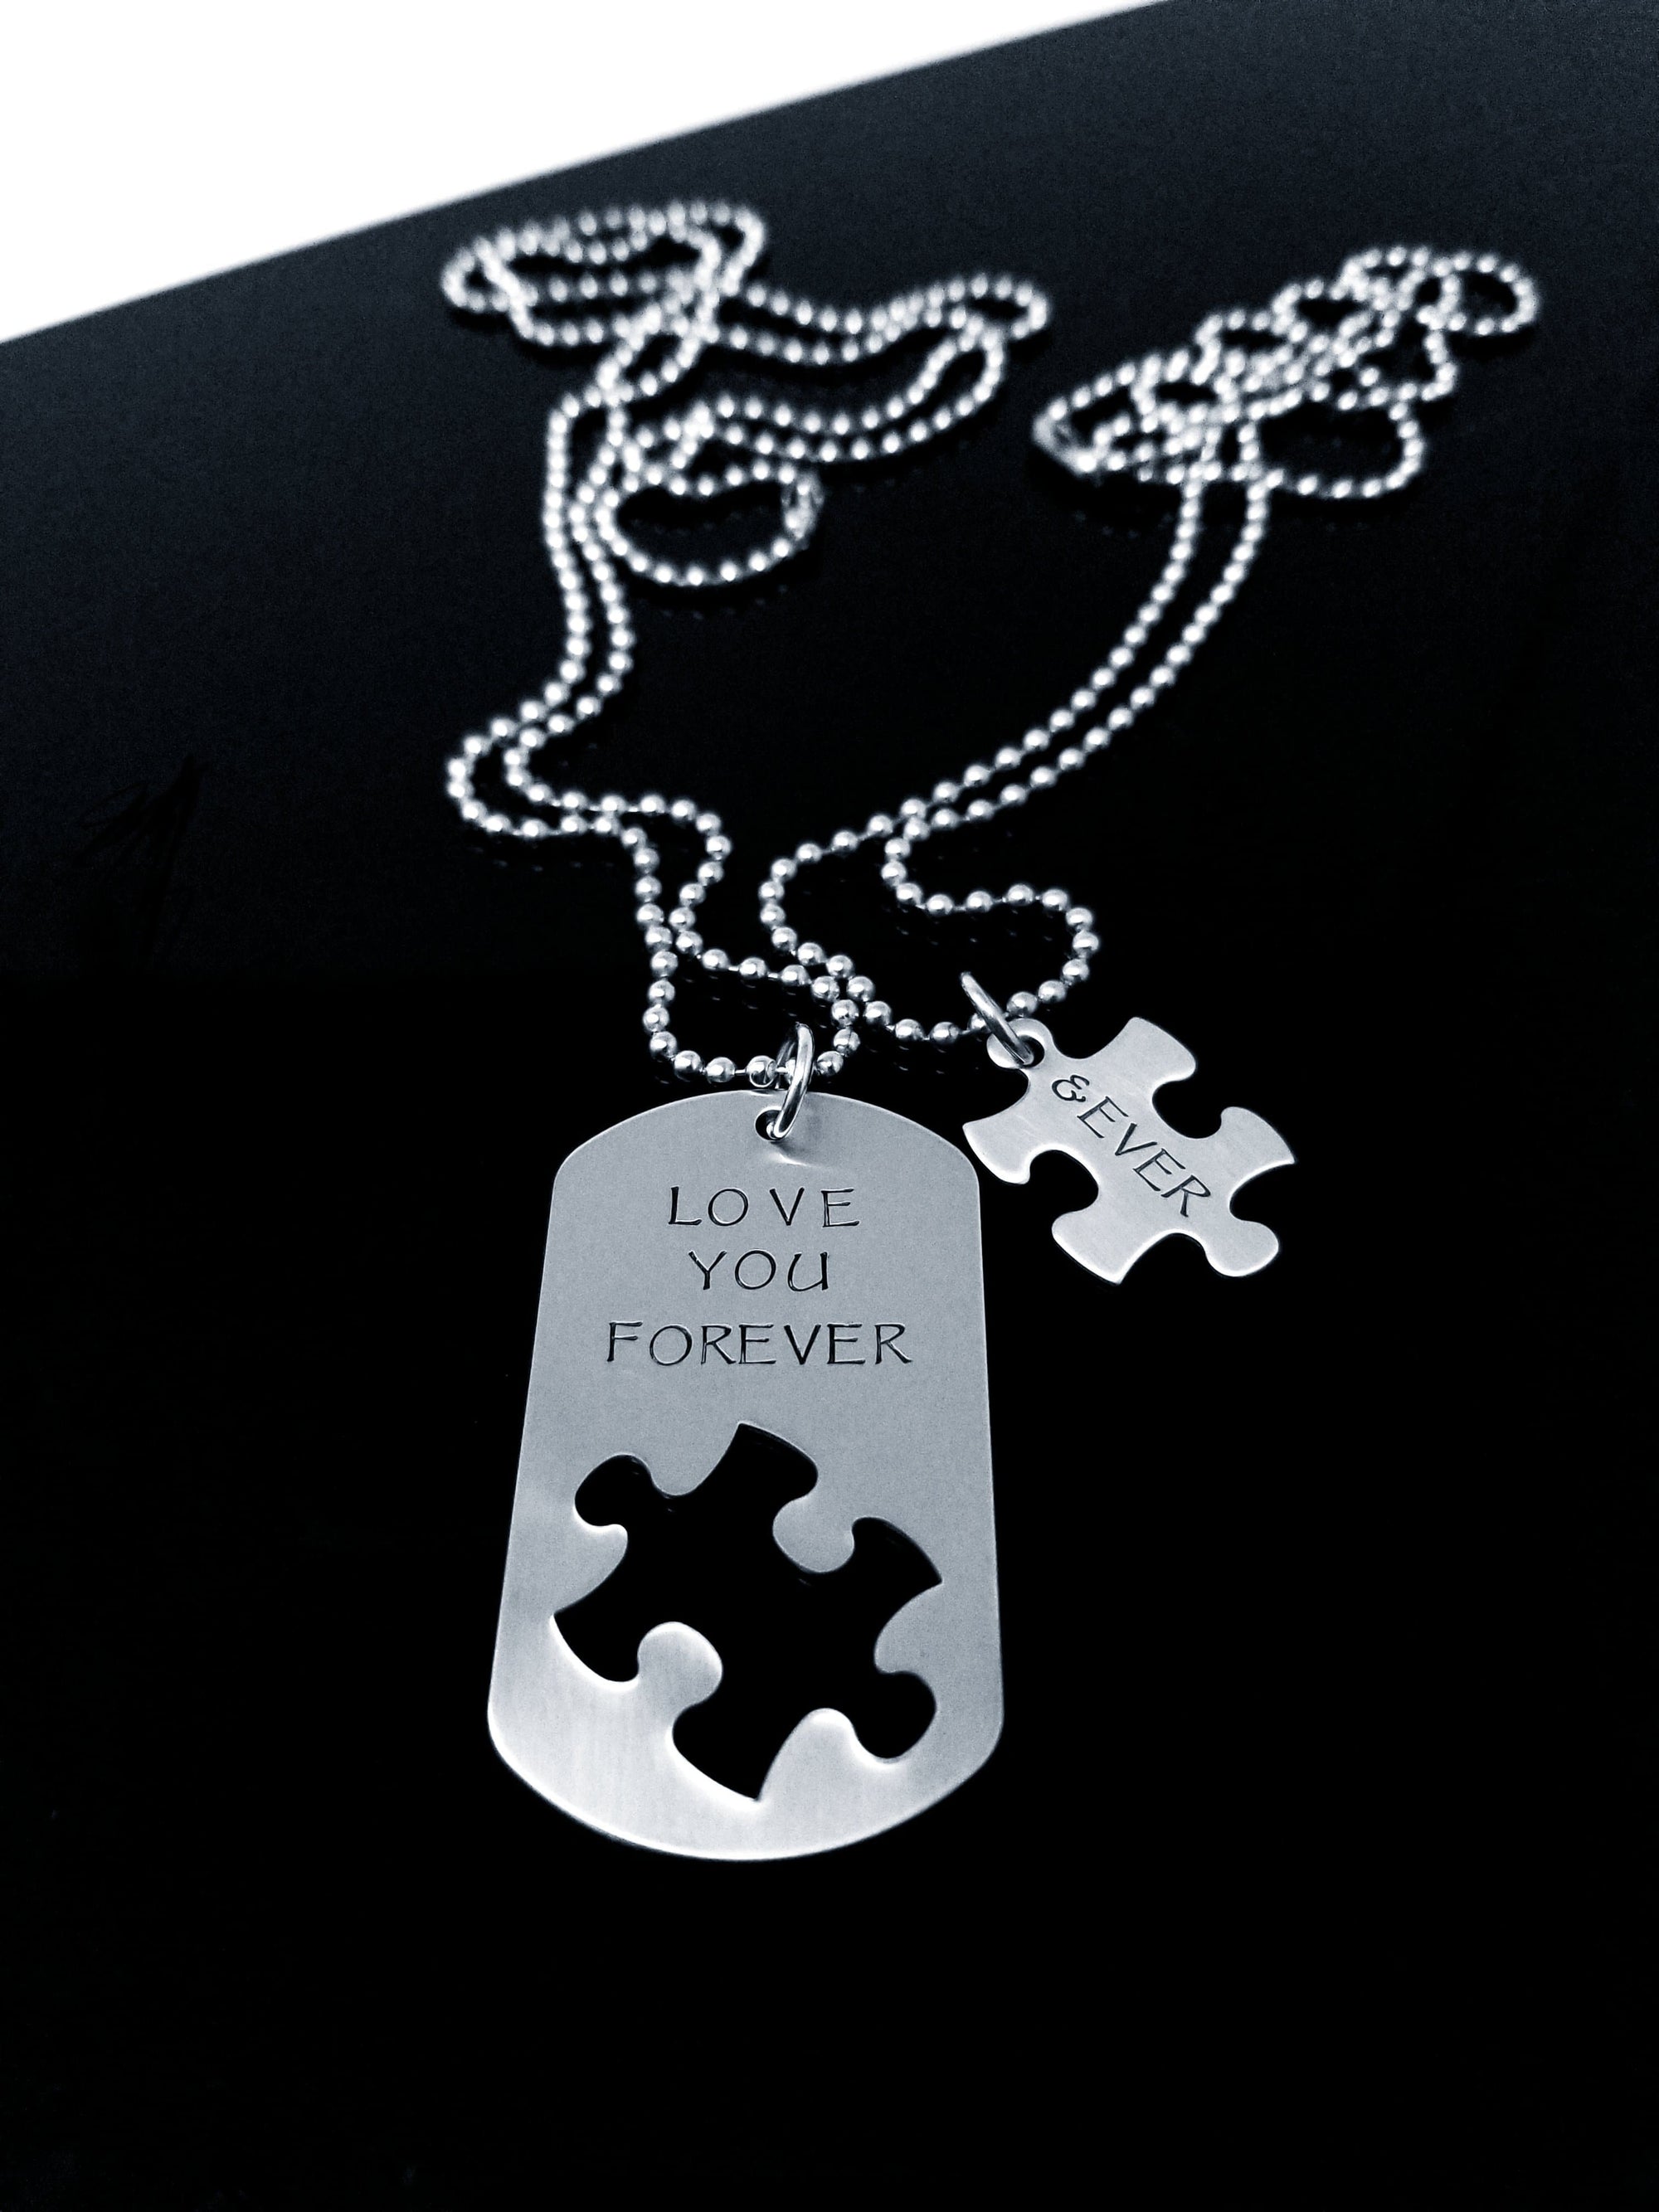 I Love You Forever & Ever Necklace Set, Puzzle Piece, Dog Tag Necklace, Boyfriend Gift, Forever, Necklaces, HandmadeLoveStories, HandmadeLoveStories , [Handmade_Love_Stories], [Hand_Stamped_Jewelry], [Etsy_Stamped_Jewelry], [Etsy_Jewelry]